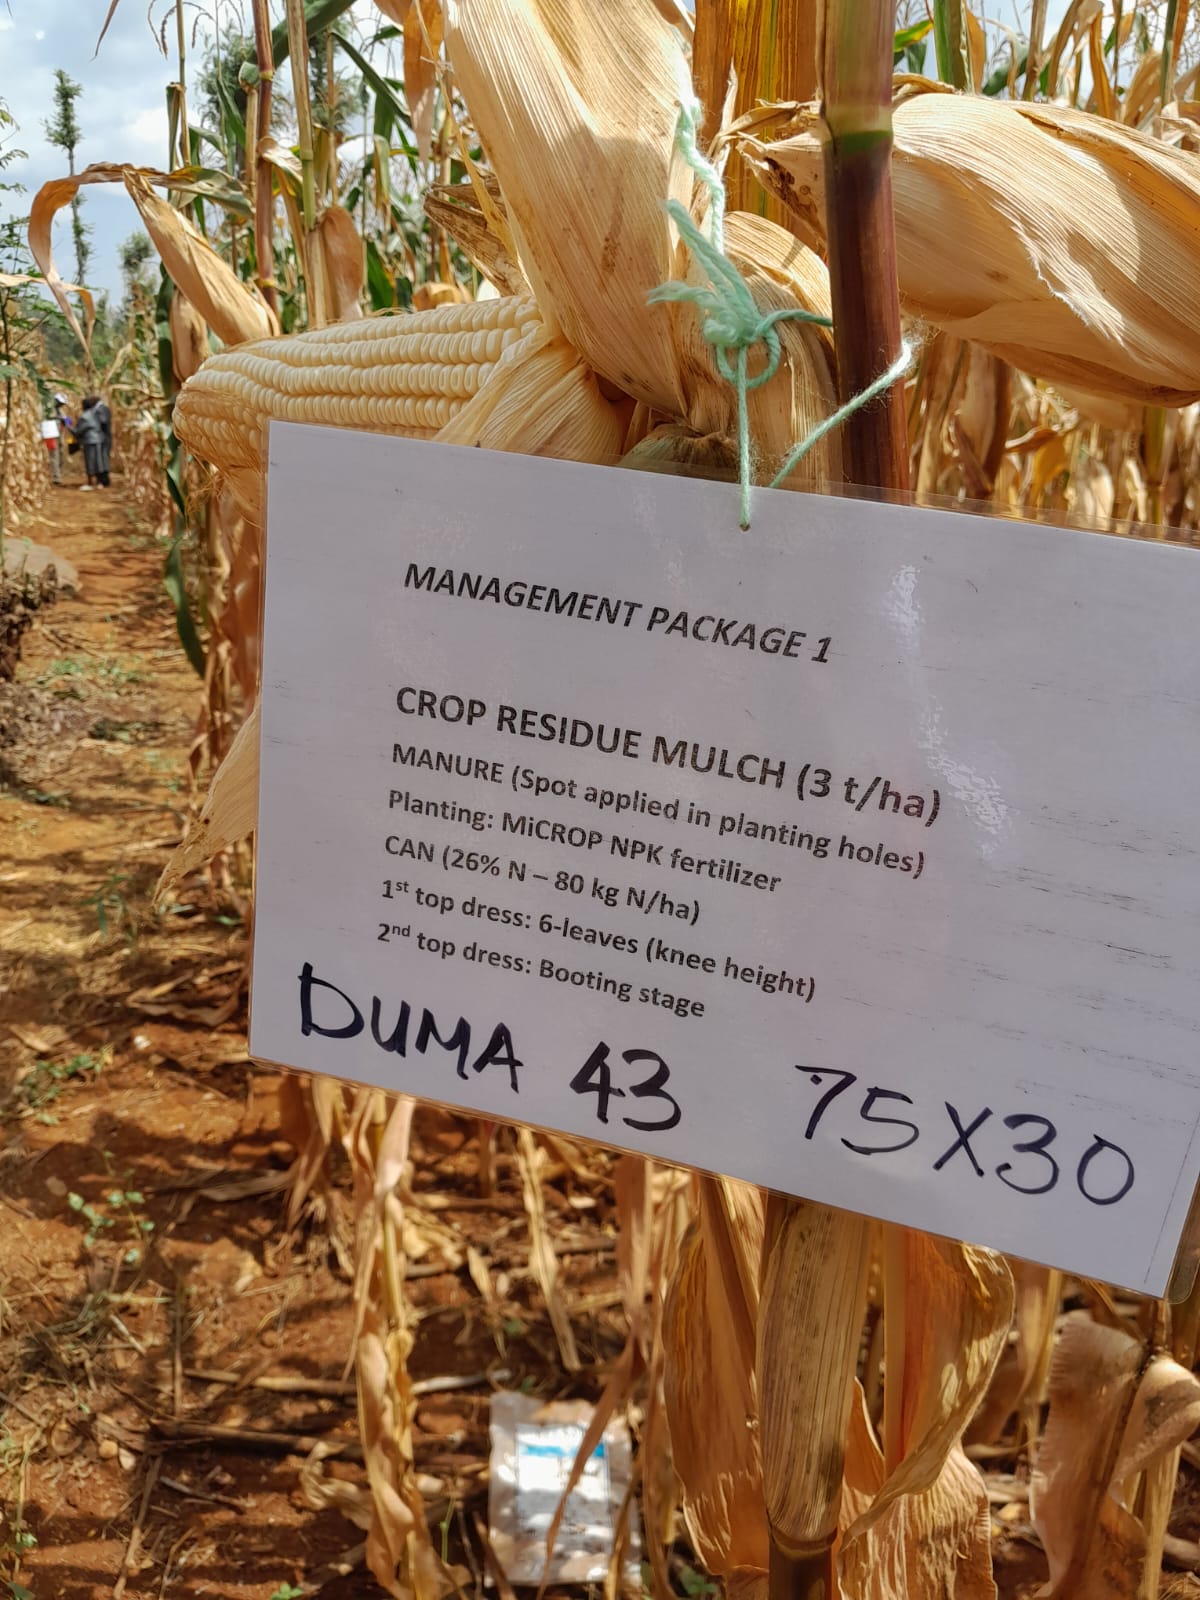 Water Stress Management in Mbeere, Embu County (1)